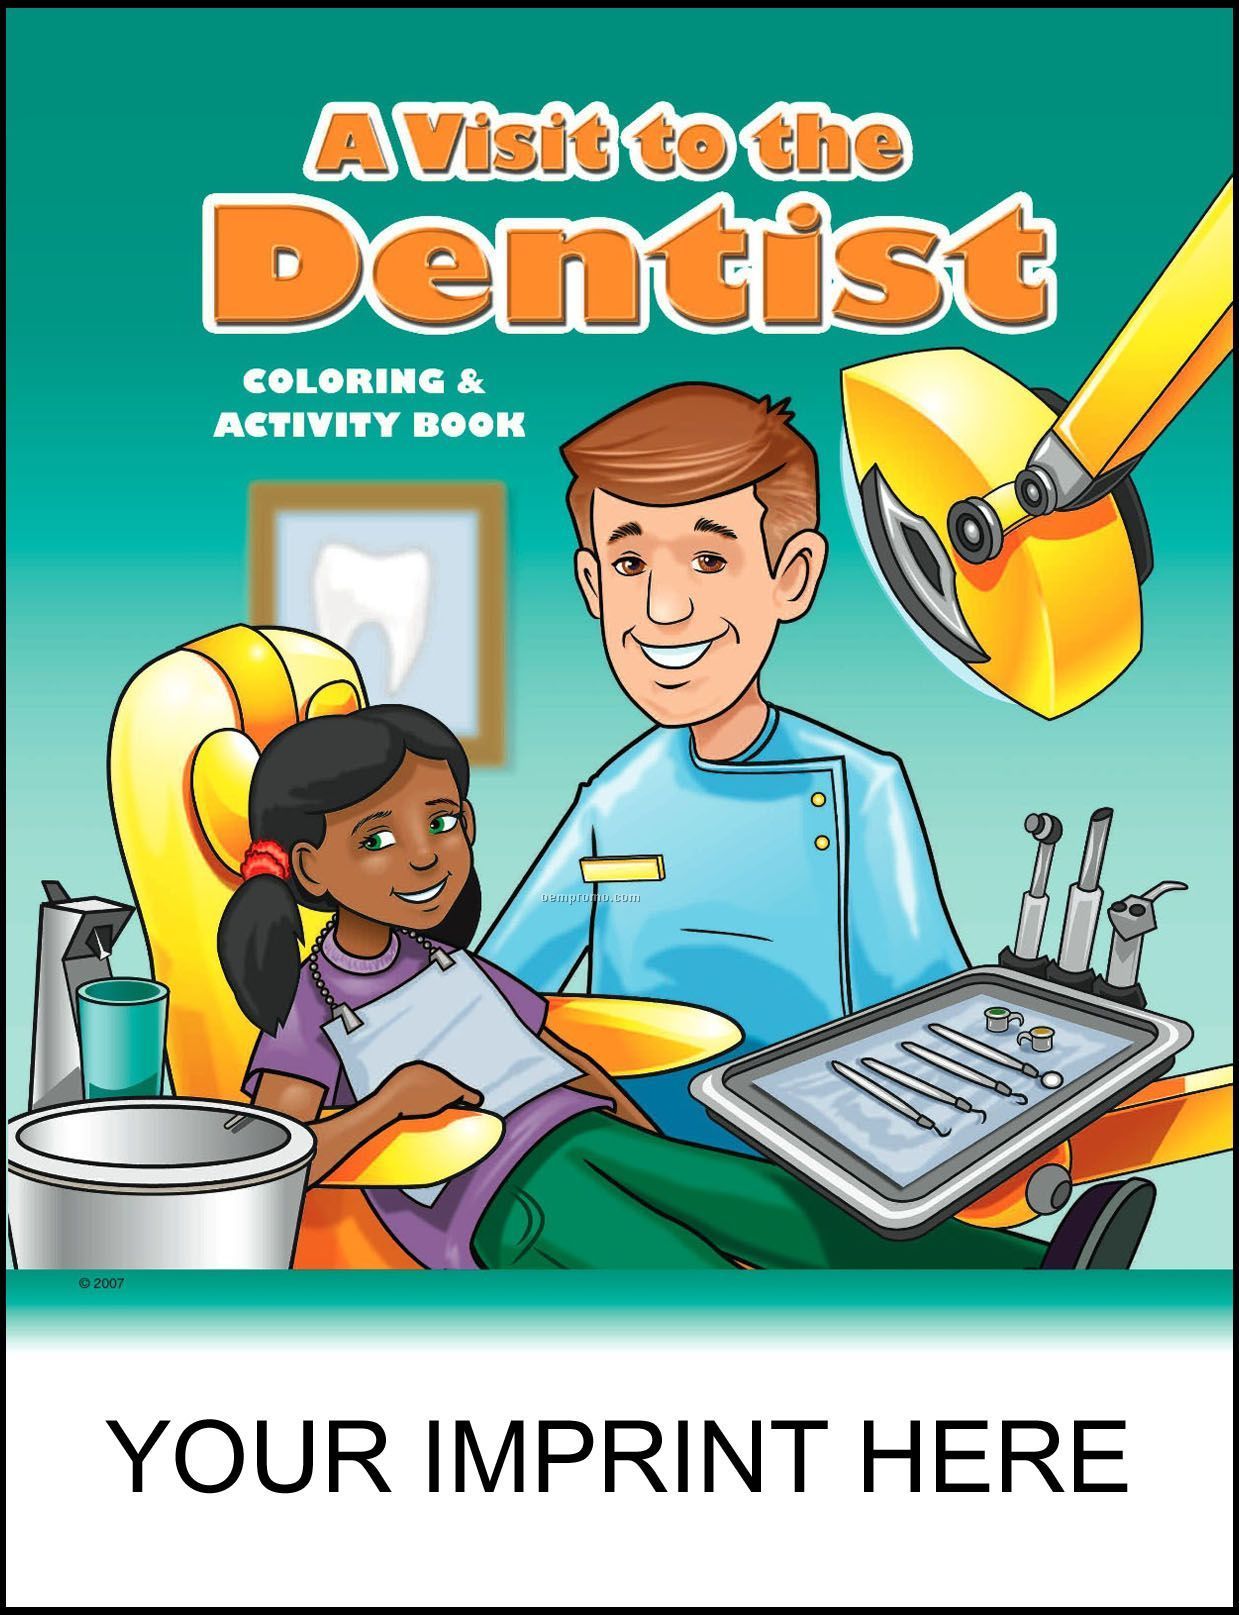 A Visit To The Dentist Coloring & Activity Book